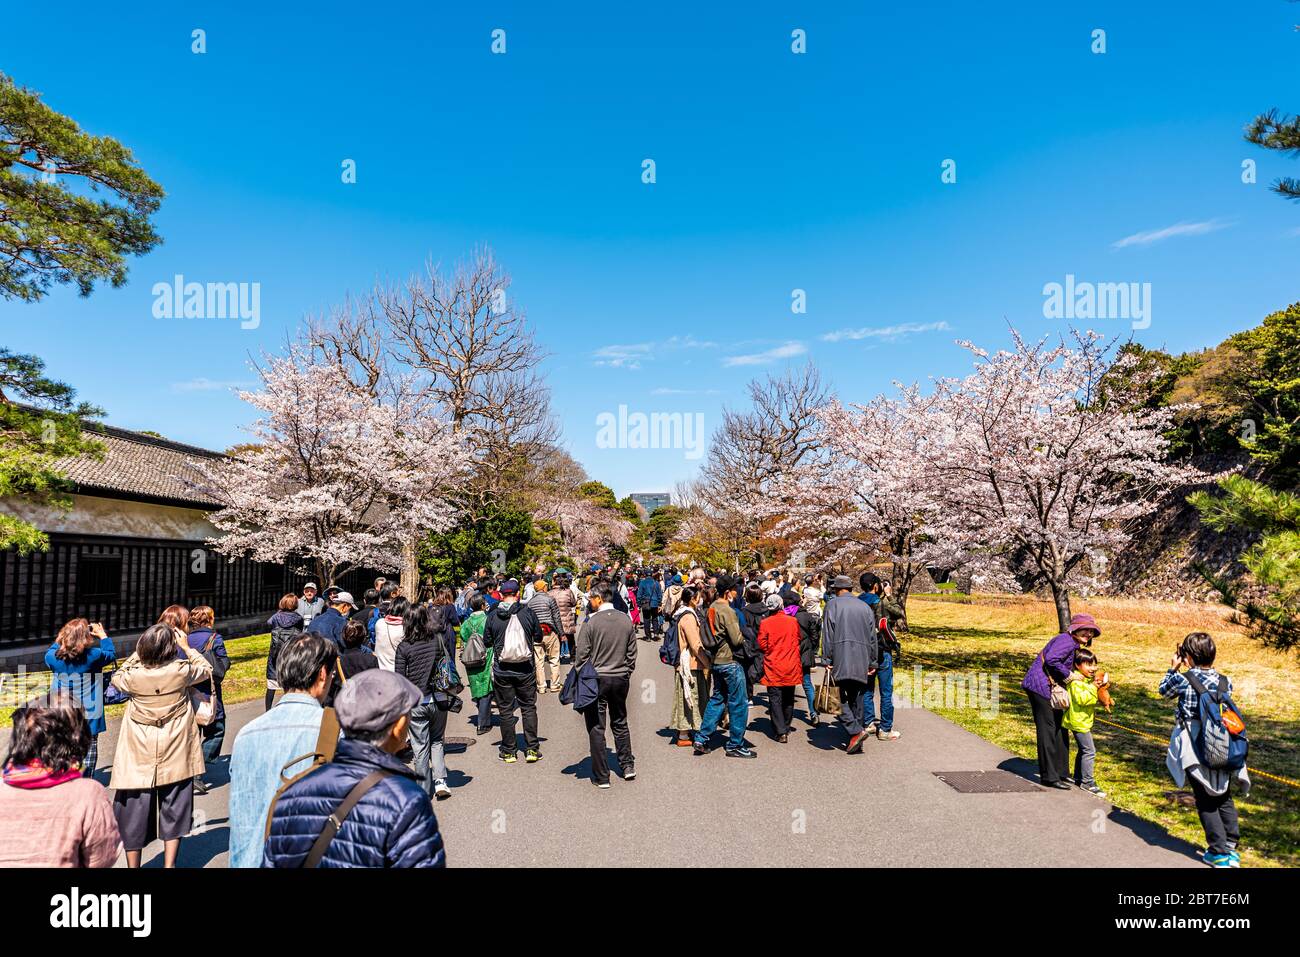 Tokyo, Japan - April 1, 2019: Imperial palace national gardens park with many crowd of people taking photos photographing cherry blossom sakura flower Stock Photo